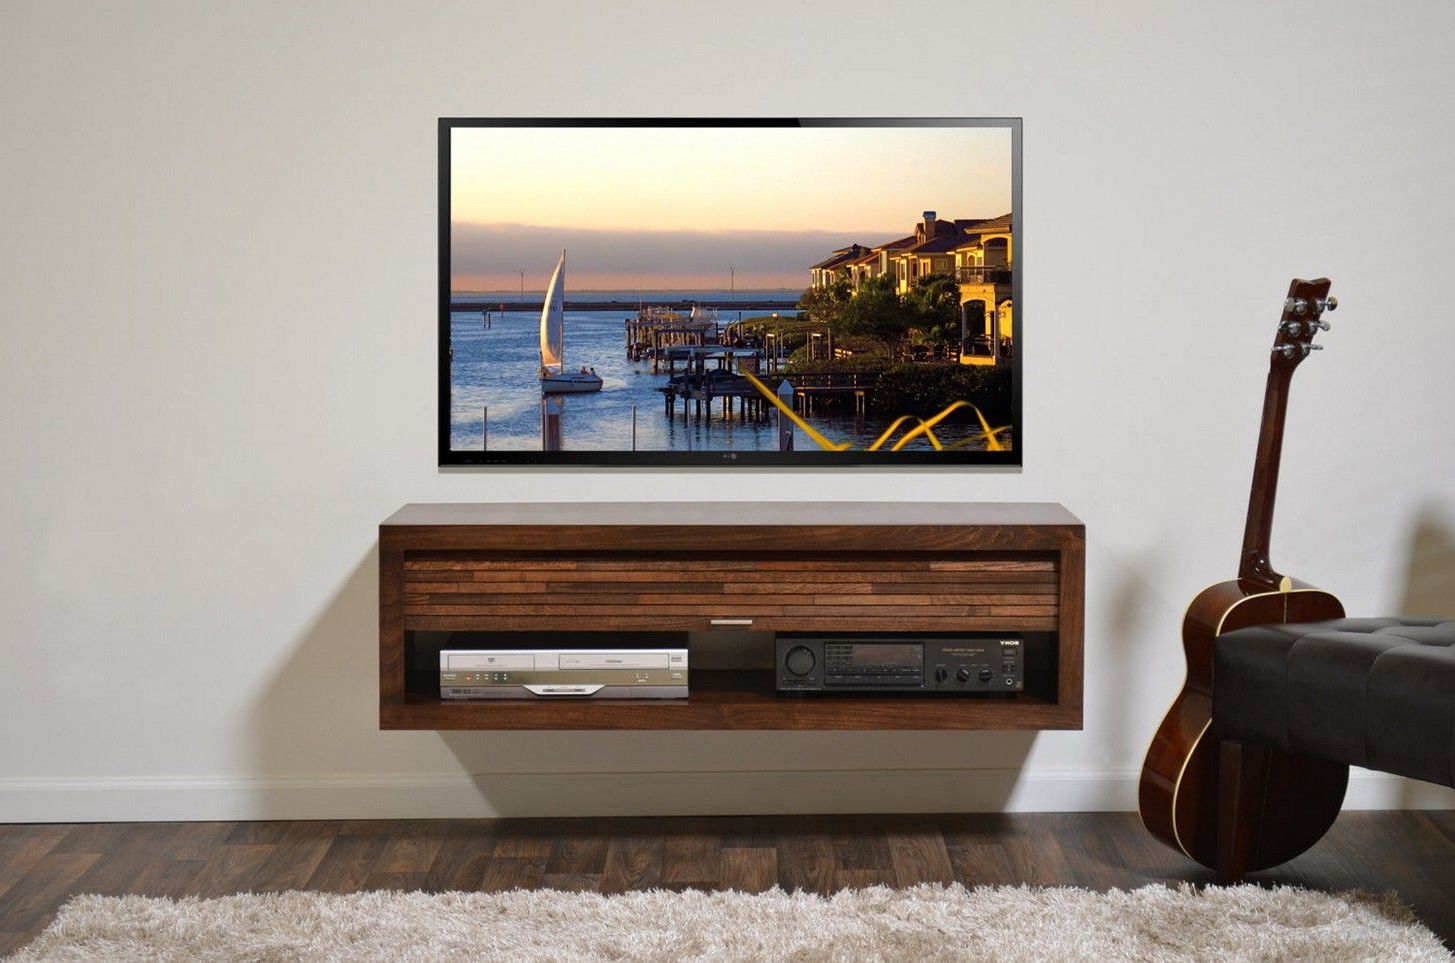 Diy Tv Stand Endless Choices For Your Room Interior With Regard To Alden Design Wooden Tv Stands With Storage Cabinet Espresso (View 5 of 20)